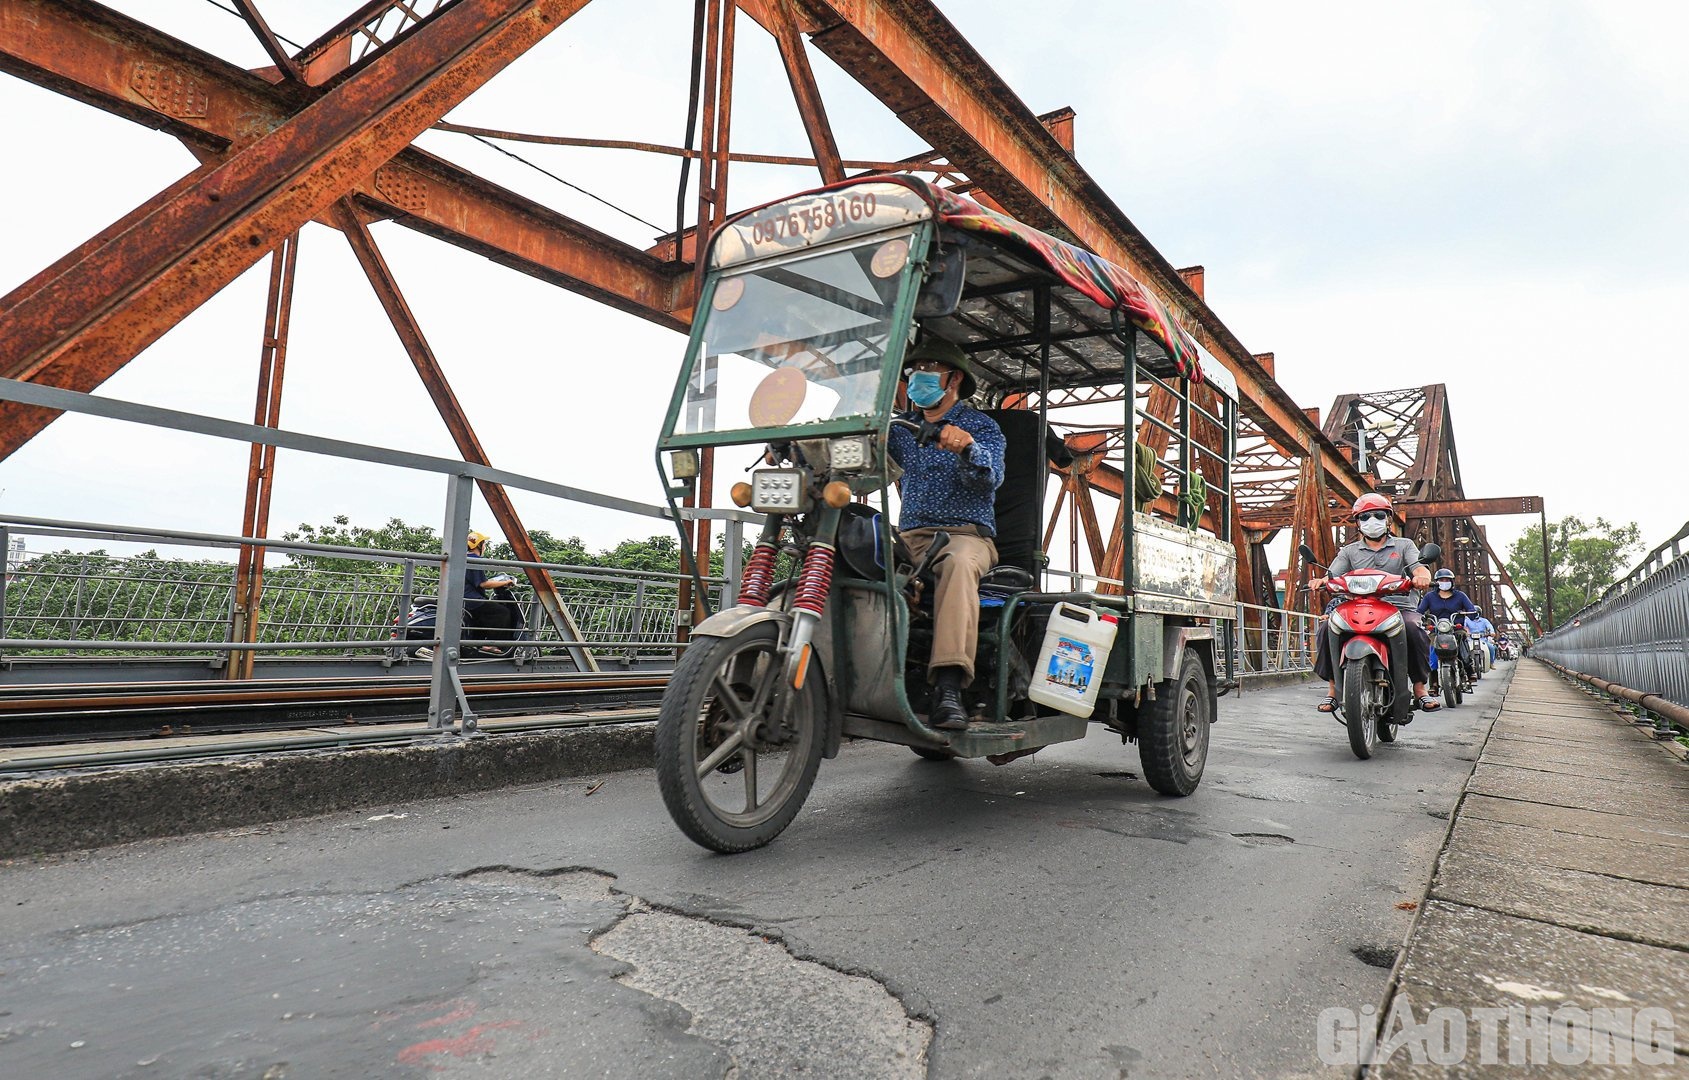 Long Bien Bridge is rusted, entangled with potholes, patched here and there - 13